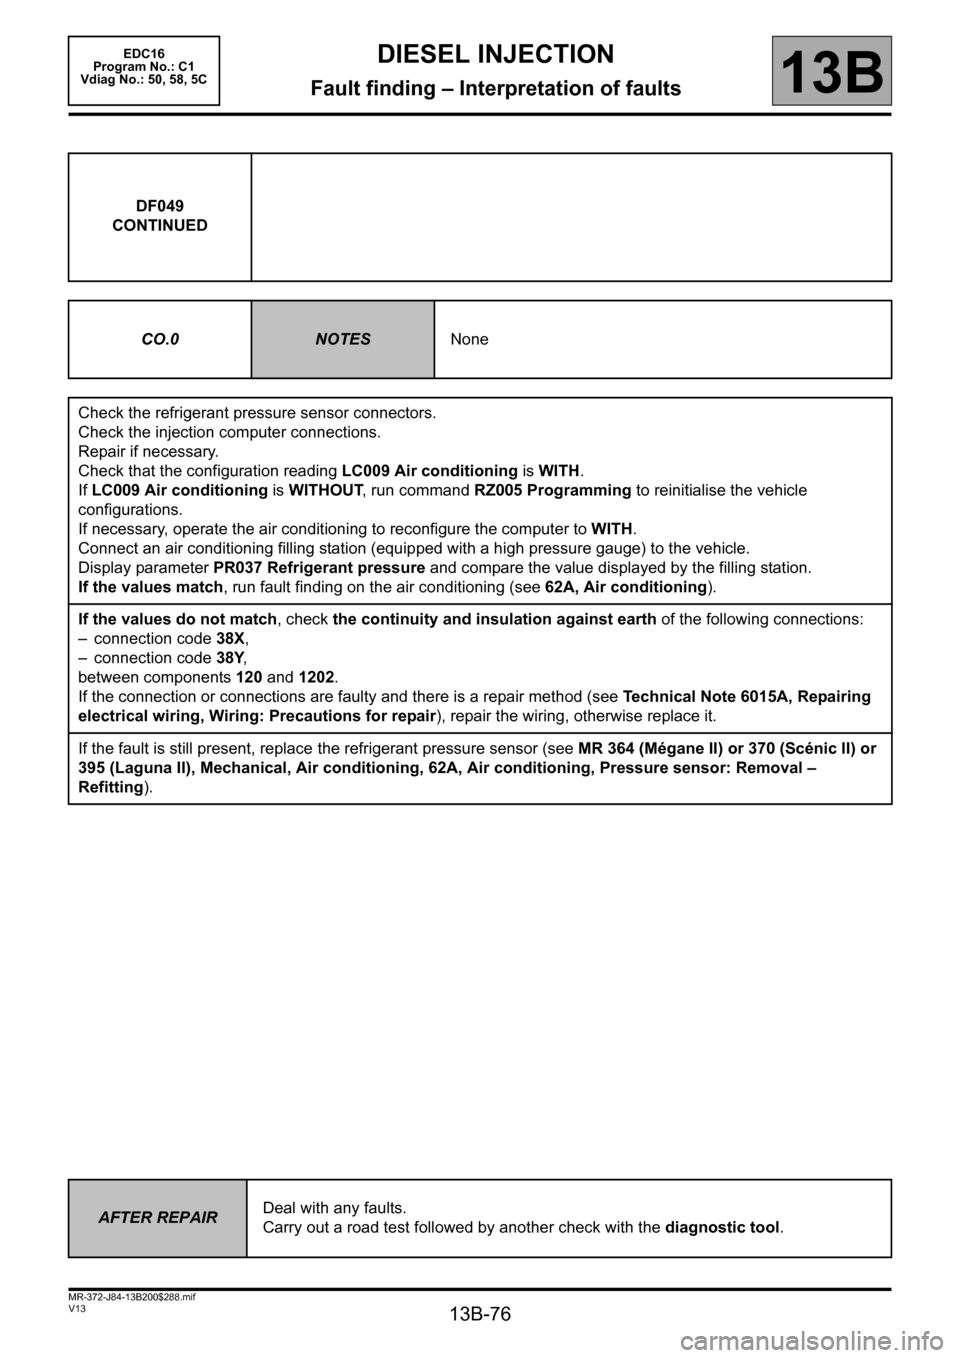 RENAULT SCENIC 2011 J95 / 3.G Engine And Peripherals EDC16 Manual PDF 13B-76
MR-372-J84-13B200$288.mif
V13
DIESEL INJECTION
Fault finding – Interpretation of faults
EDC16  
Program No.: C1 
Vdiag No.: 50, 58, 5C
13B
DF049
CONTINUED
CO.0
NOTESNone
Check the refrigerant